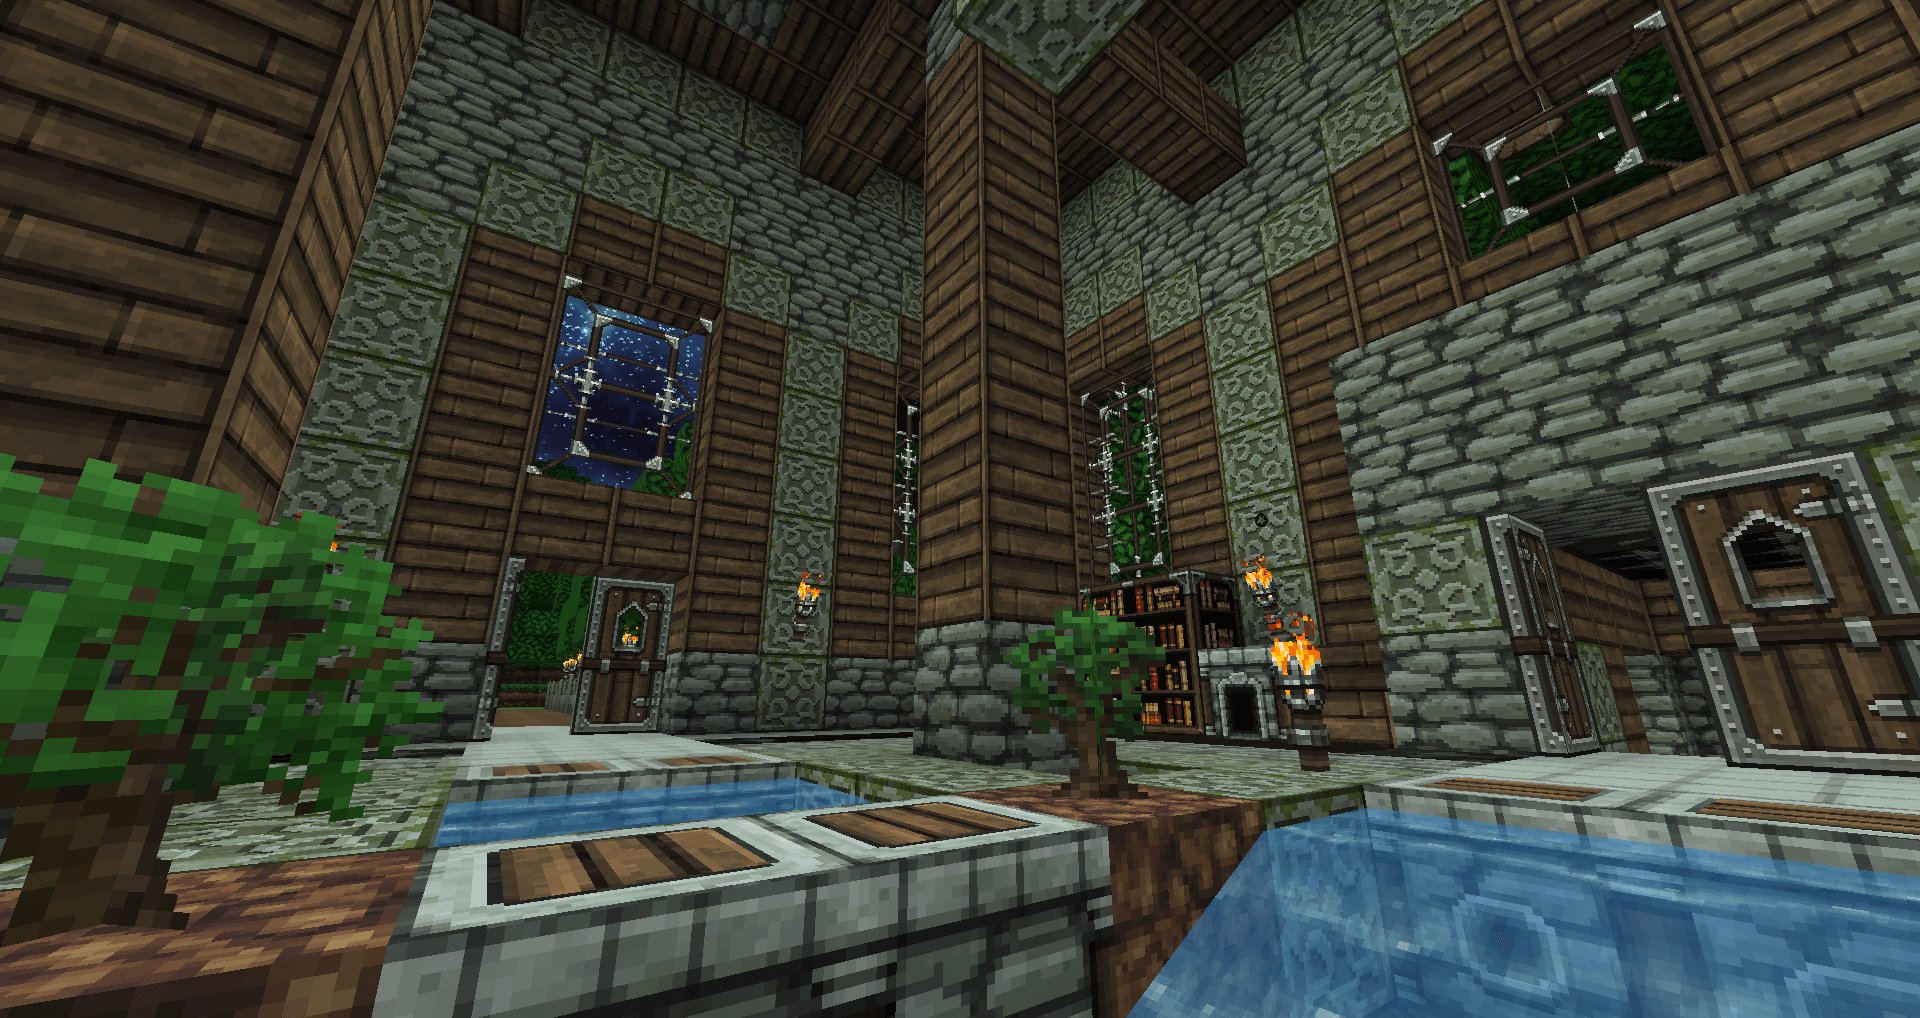 Minecraft texture pack - Dokucraft - The interior of a wood and stone building with fantasy-looking block textures